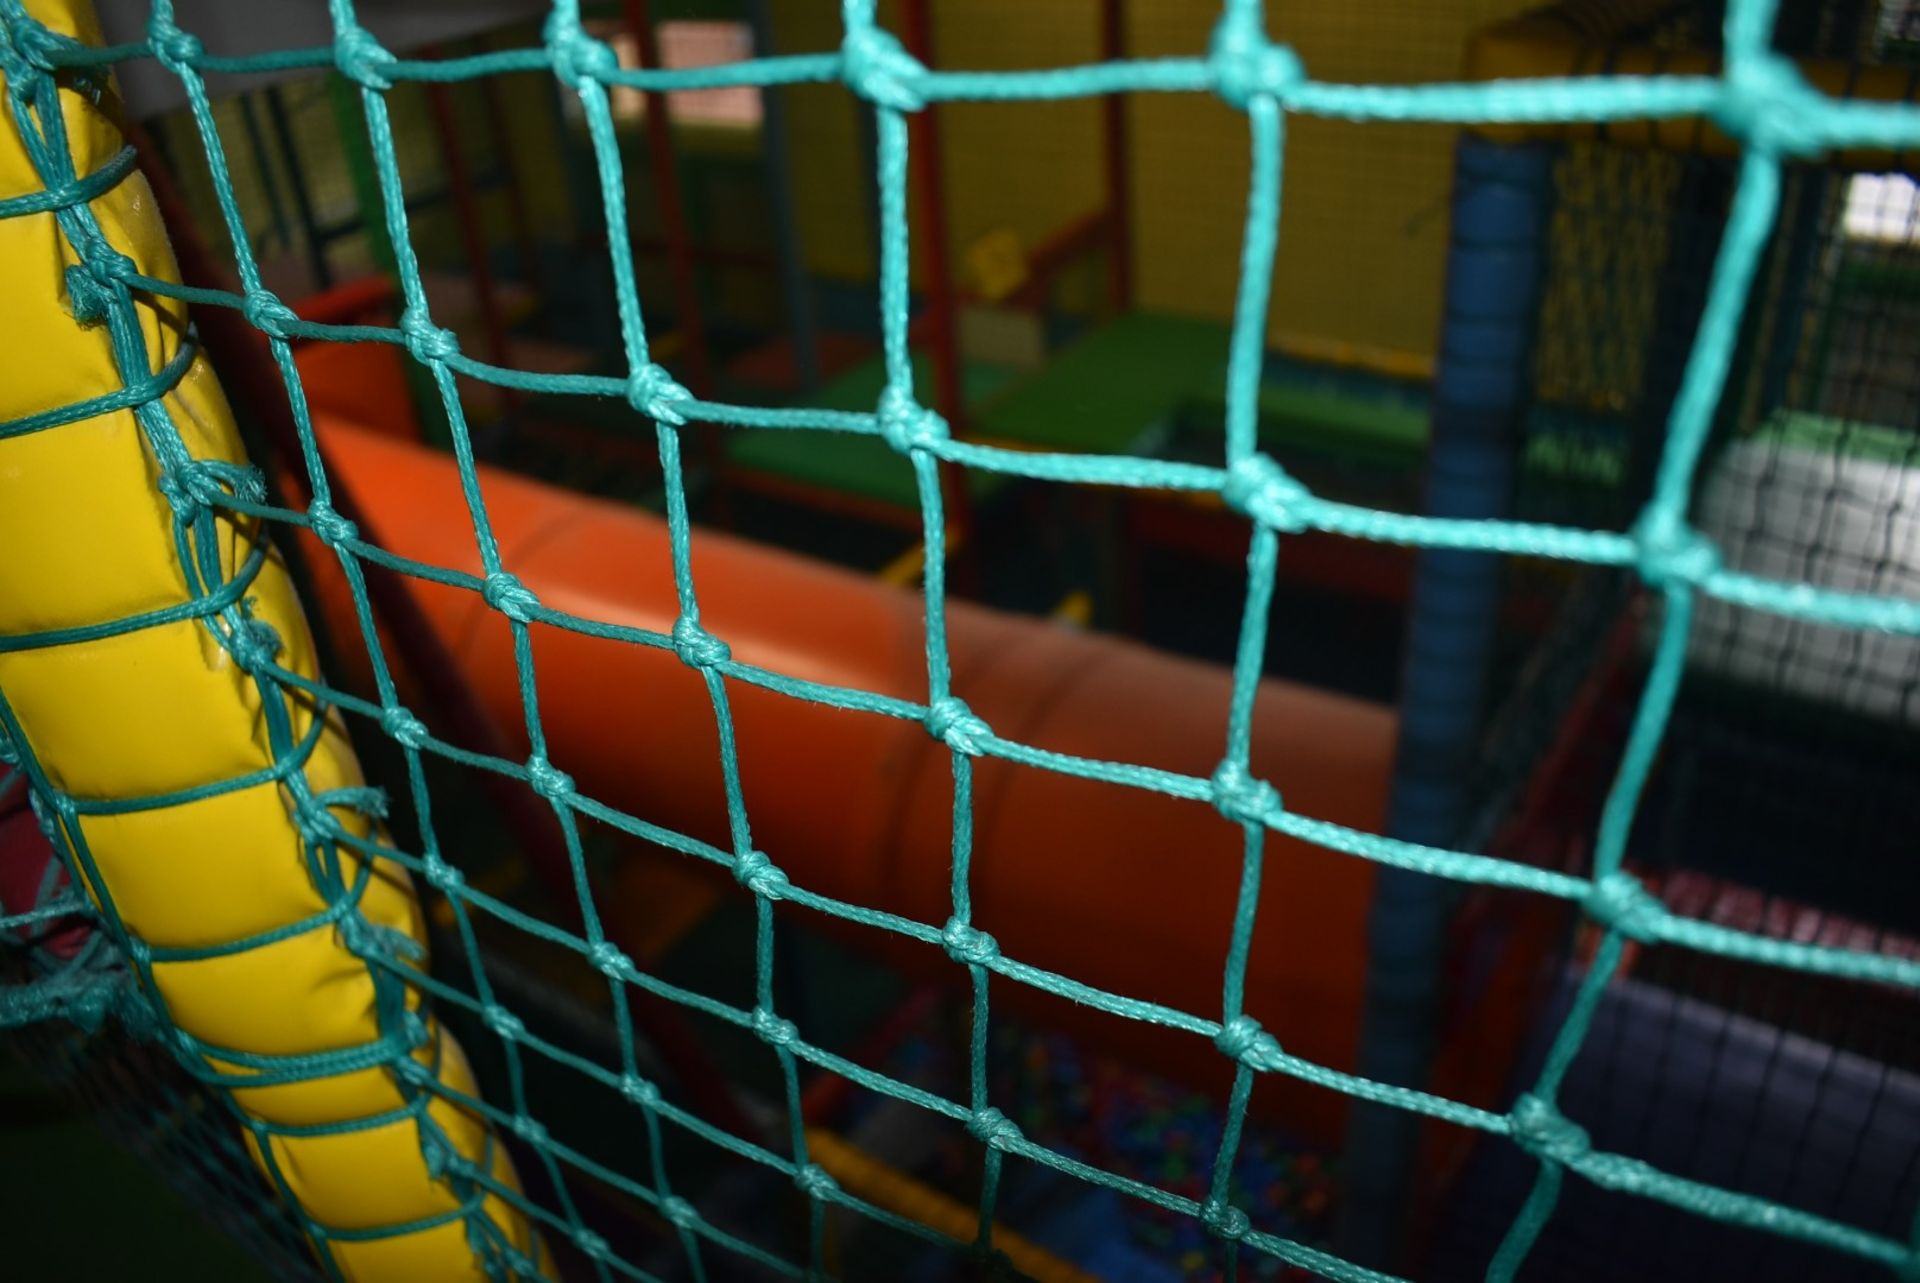 Bramleys Big Adventure Playground - Giant Action-Packed Playcentre With Slides, Zip Line Swings, - Image 68 of 128